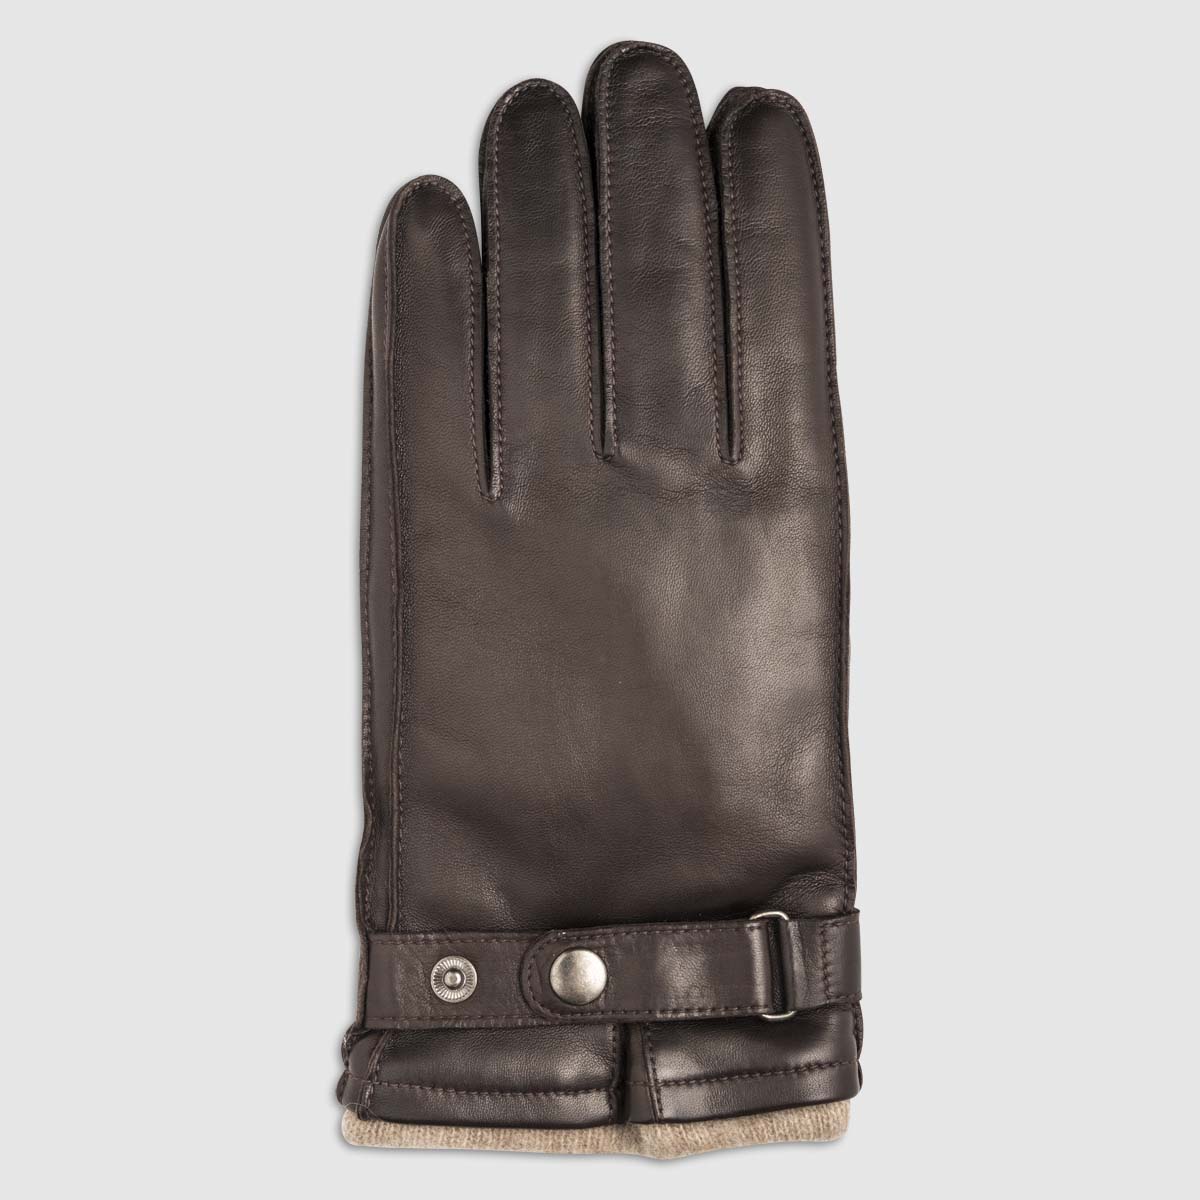 Nappa Leather Glove with Cashmere Lining in Mocca – 8